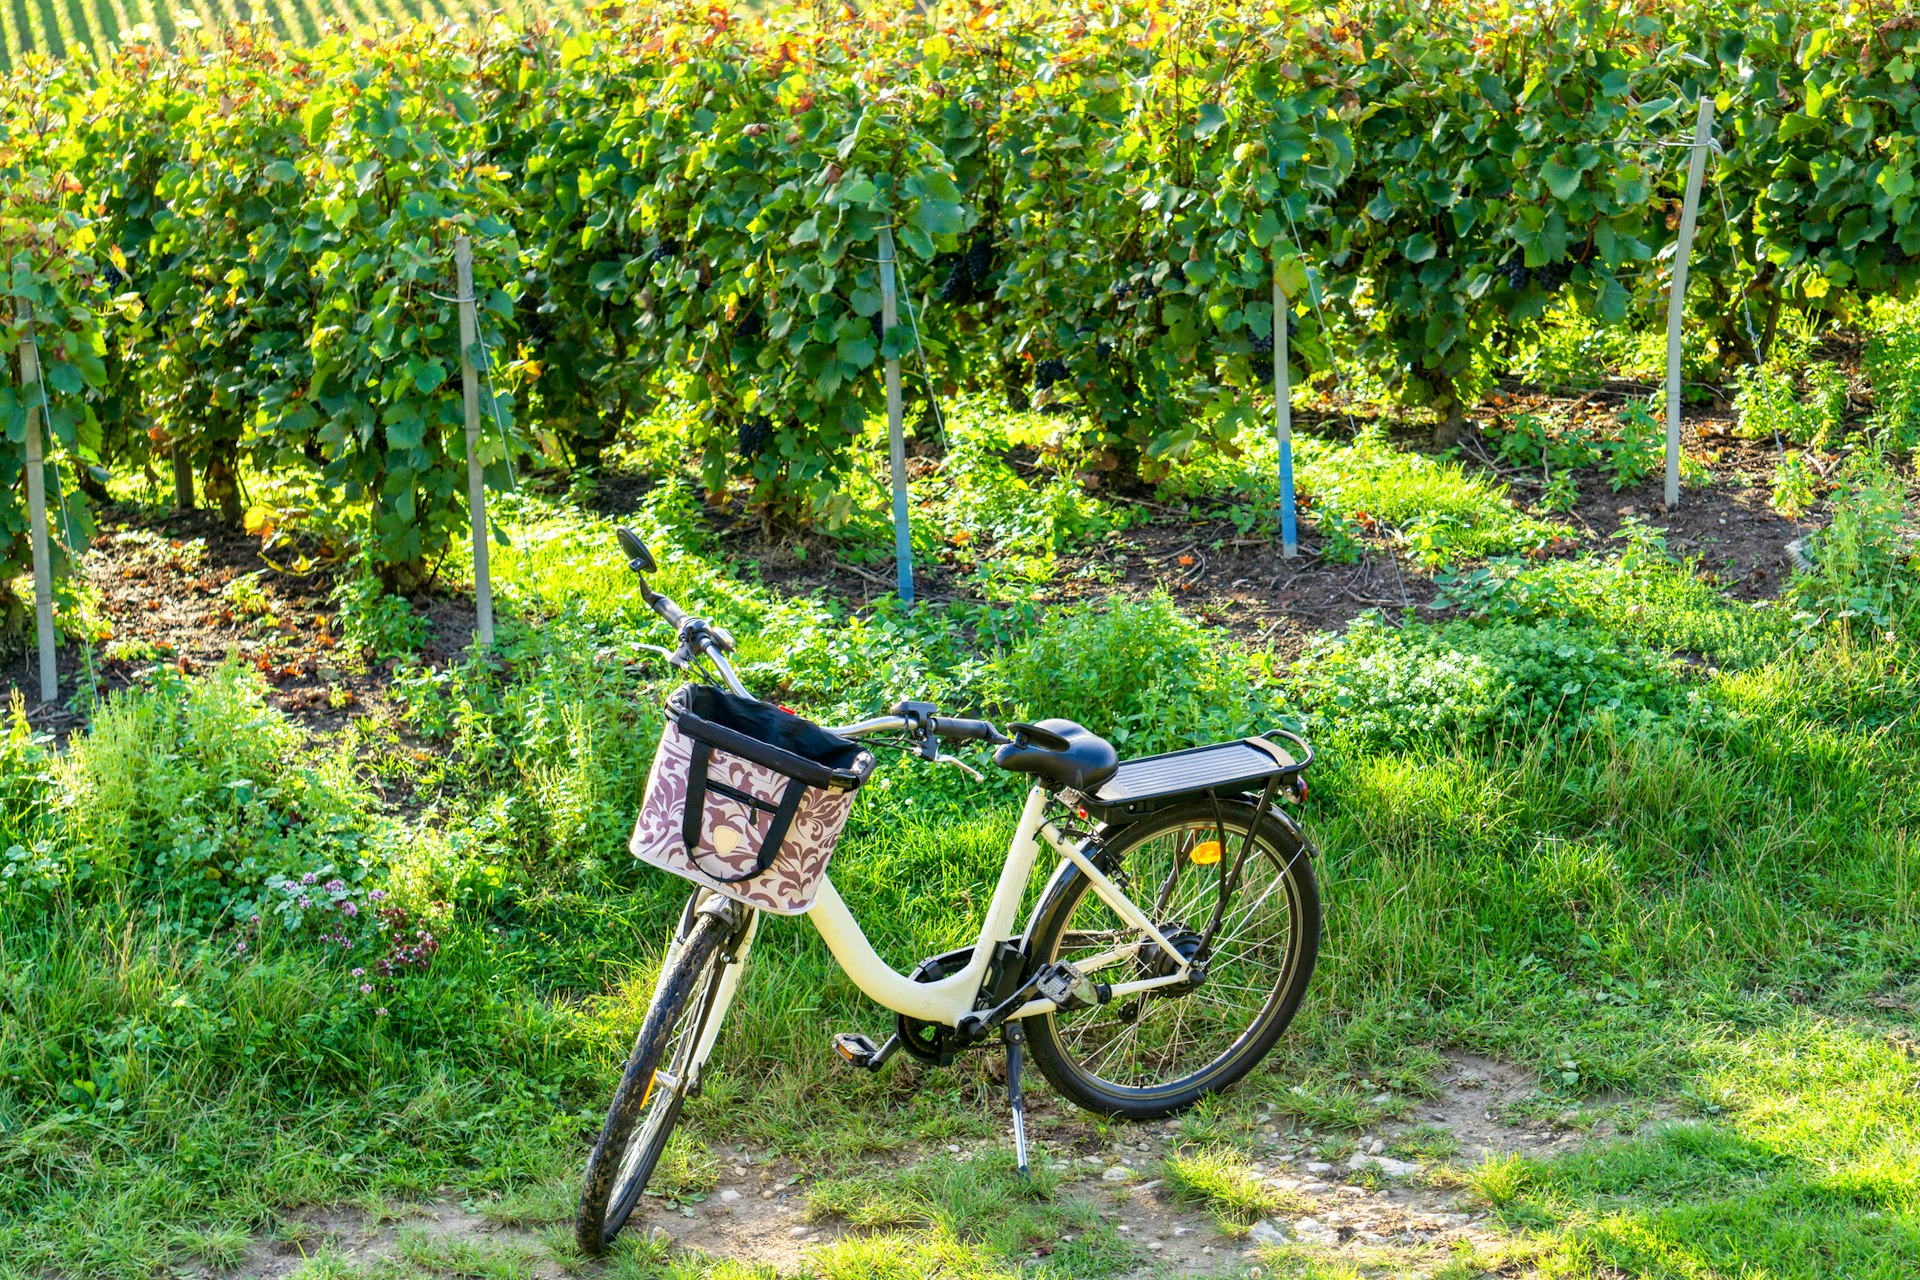 Bicycle on the road in champagne vineyards at montagne de reims countryside village background, France